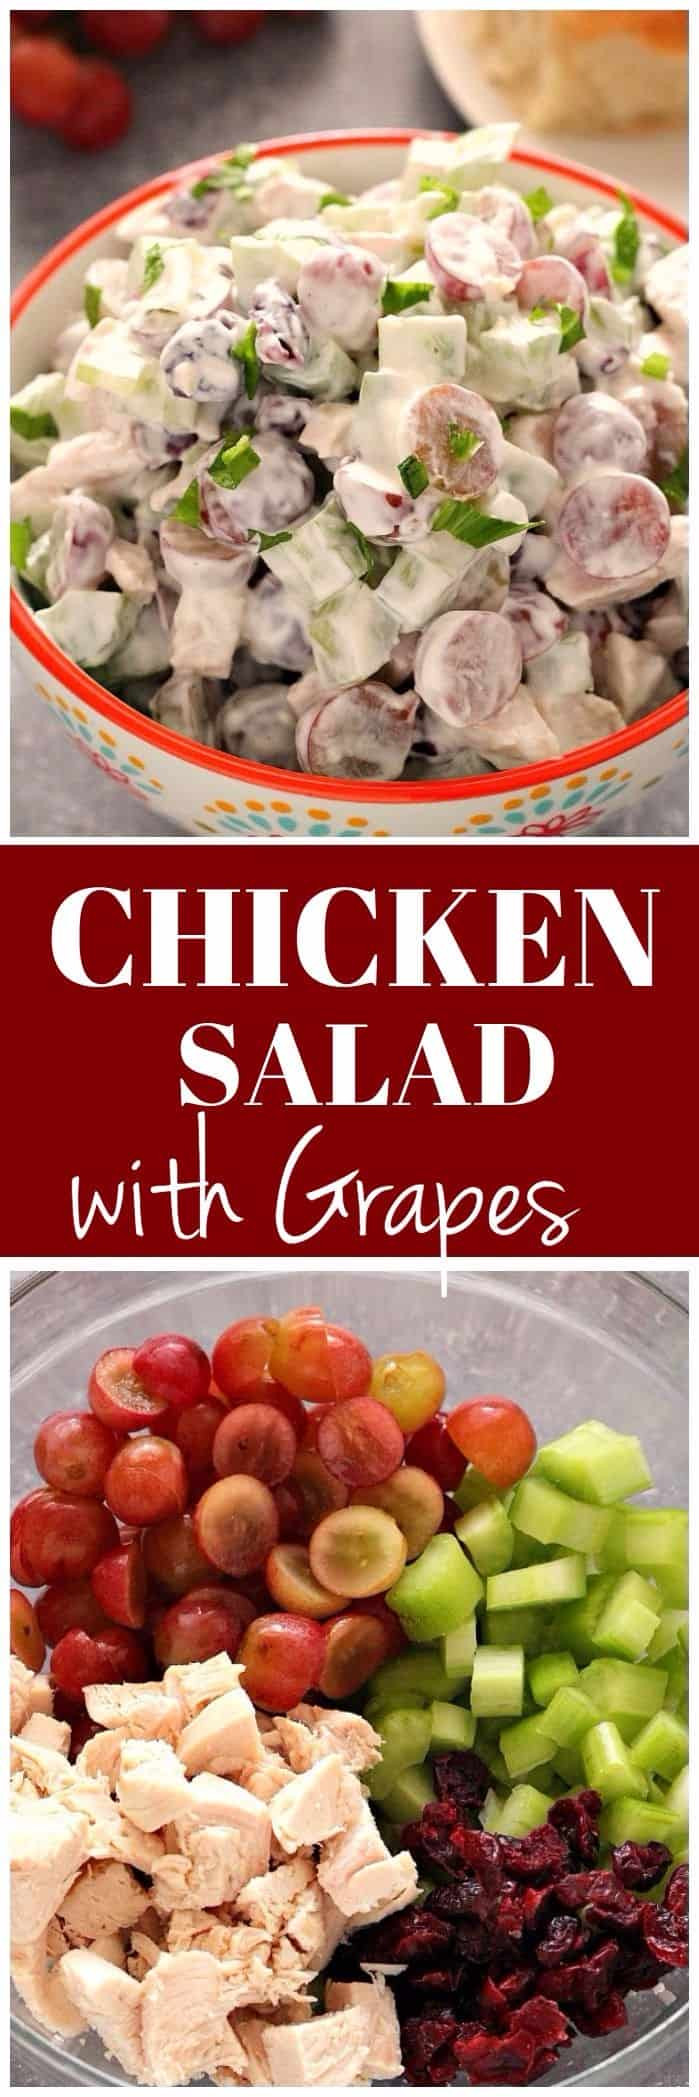 Easy Chicken Salad Recipe With Grapes
 Easy Chicken Salad with Grapes Recipe Crunchy Creamy Sweet